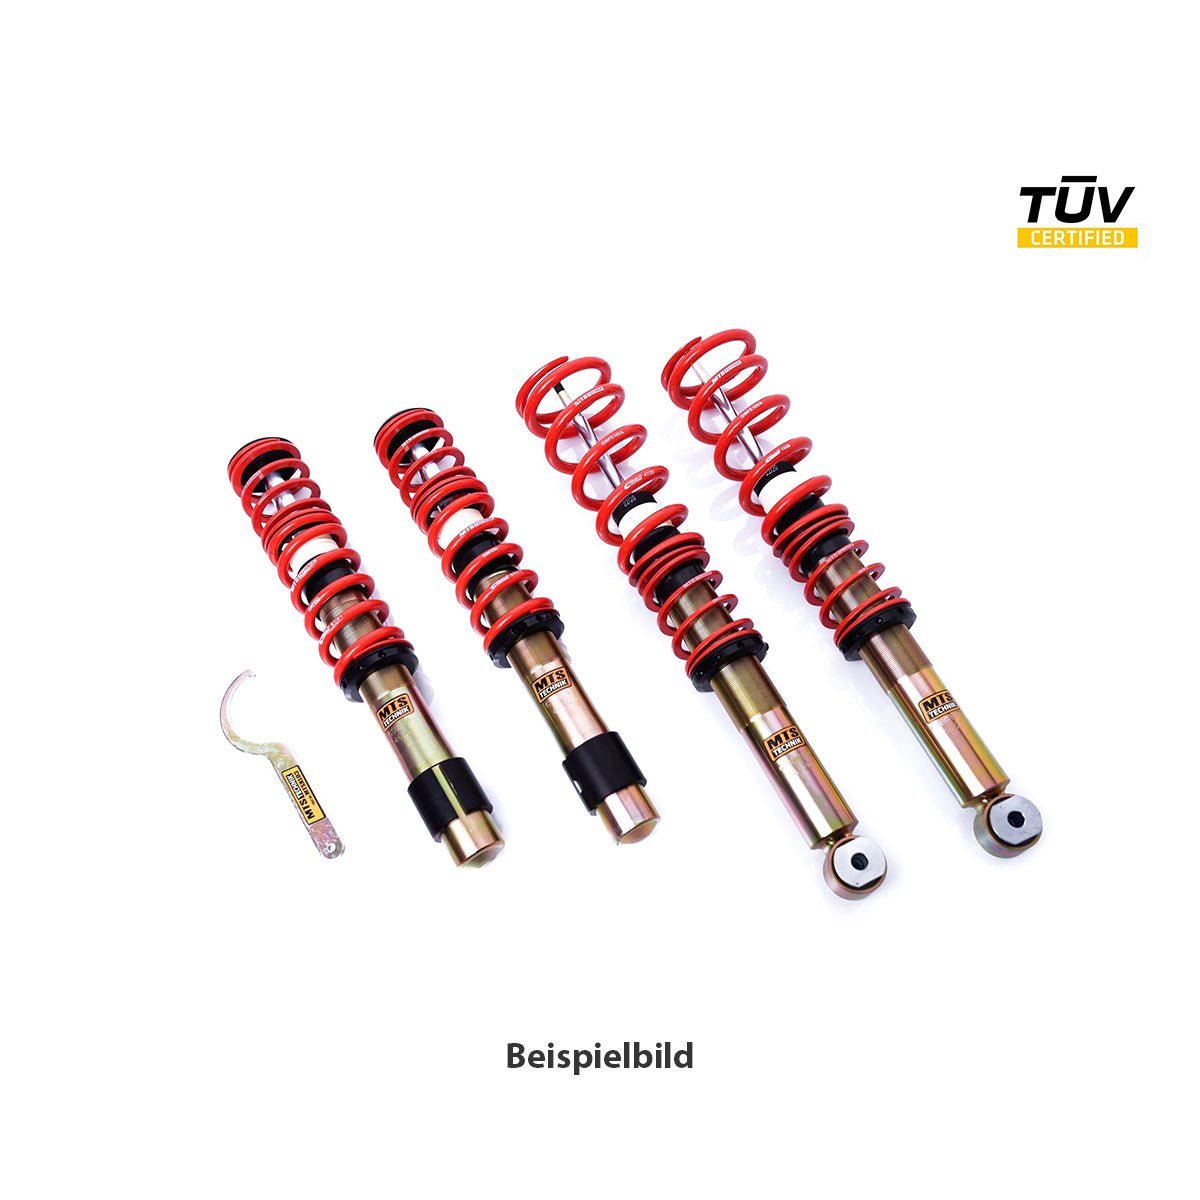 MTS TECHNIK Eibach coilover kit STREET Ford Mondeo 3 station wagon (with TÜV) - PARTS33 GmbH